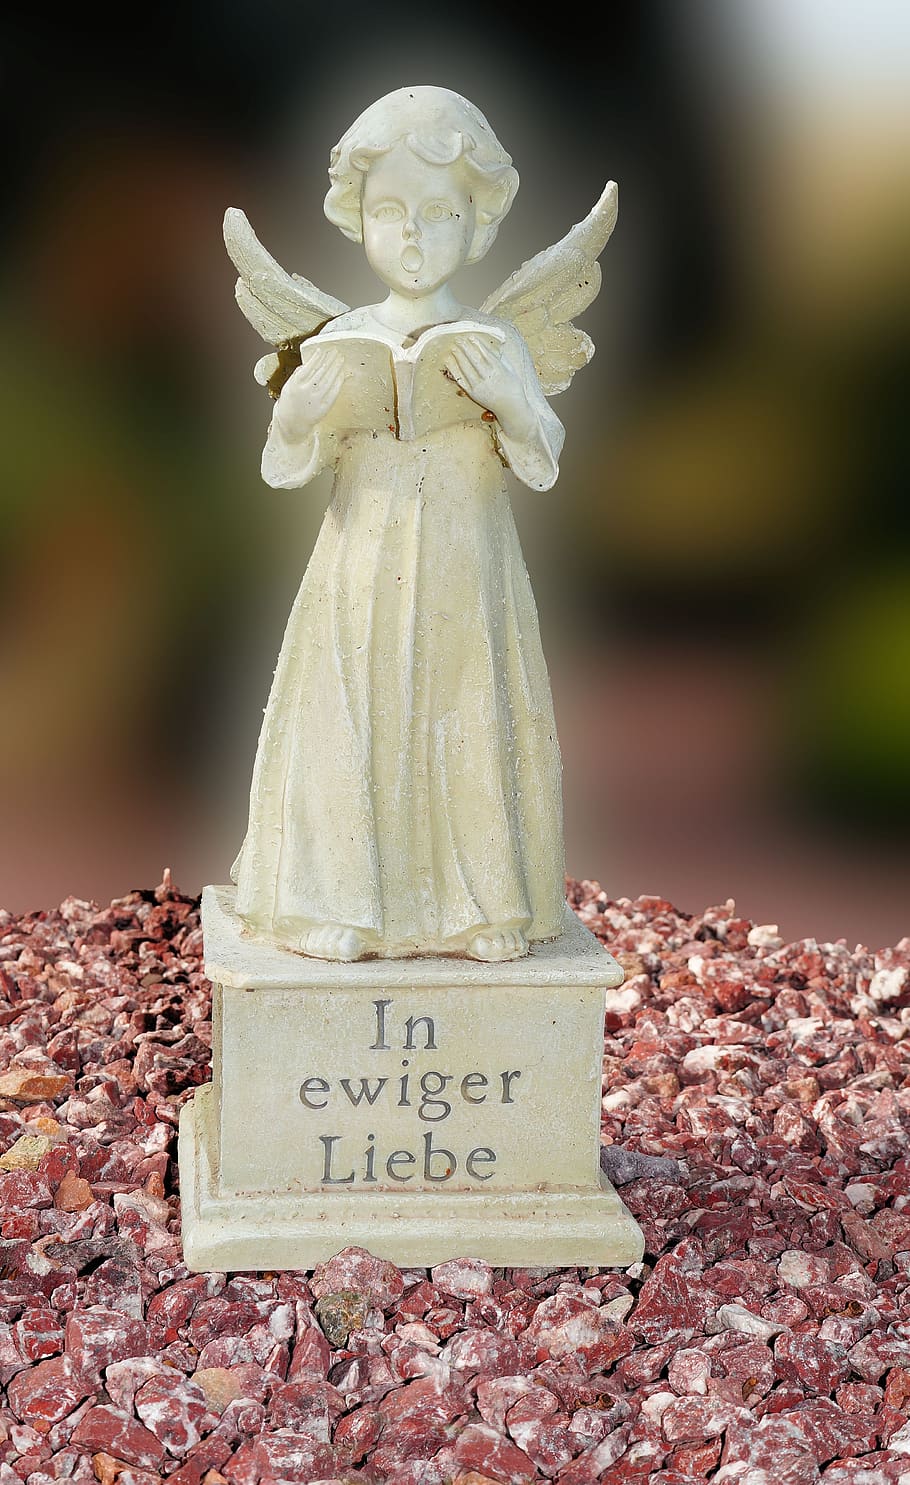 angel, statue, cemetery, tombstone, mourning, figure, sculpture, wing, angel figure, harmony